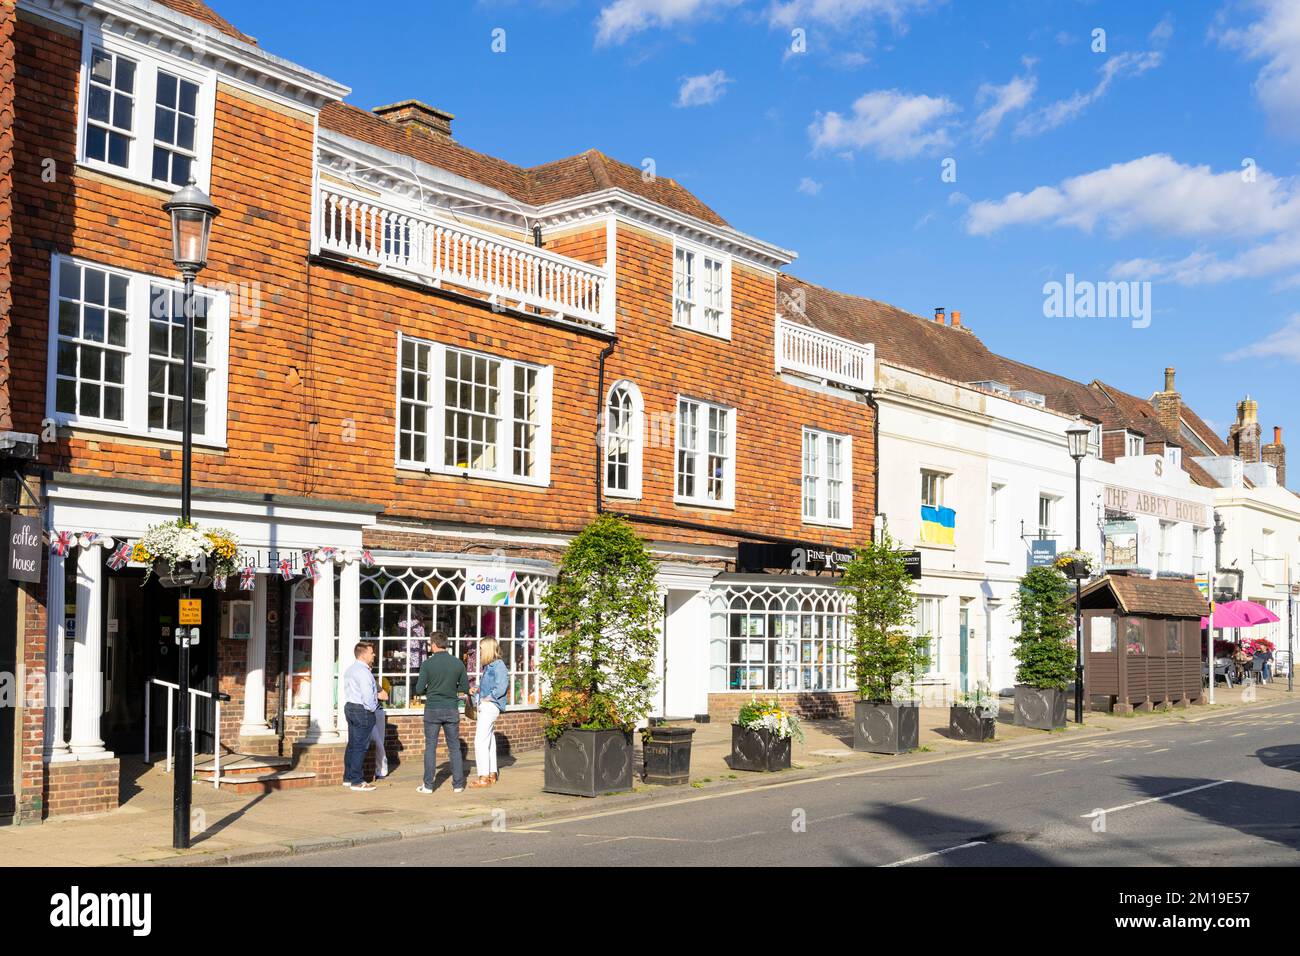 Battle East Sussex Battle Memorial Hall part of Langton Hall and shops on Battle High street Battle East Sussex England UK GB Europe Stock Photo